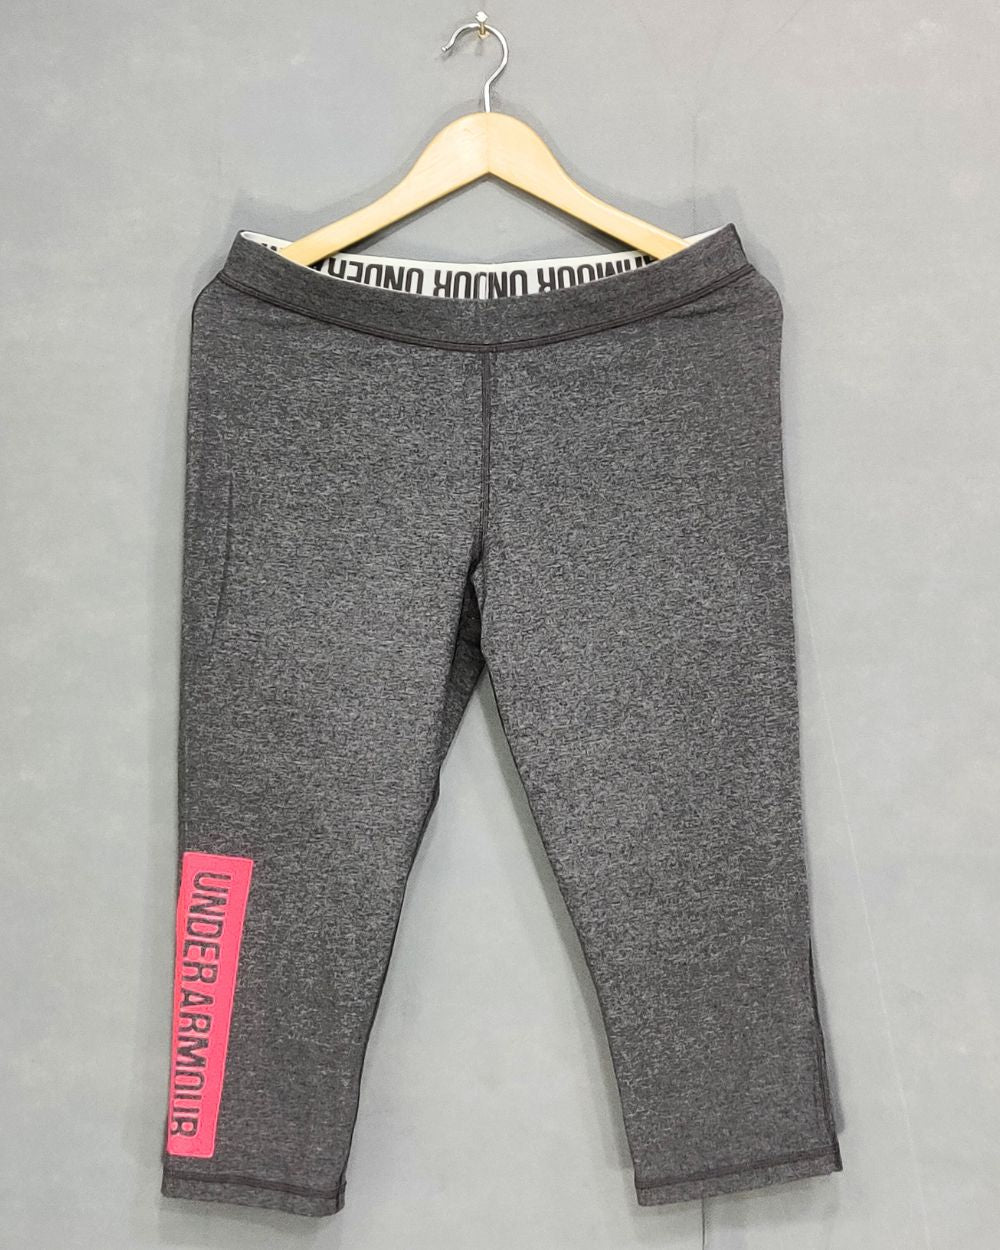 Under Armour Branded Original Sports Stretch Gym tights For Women